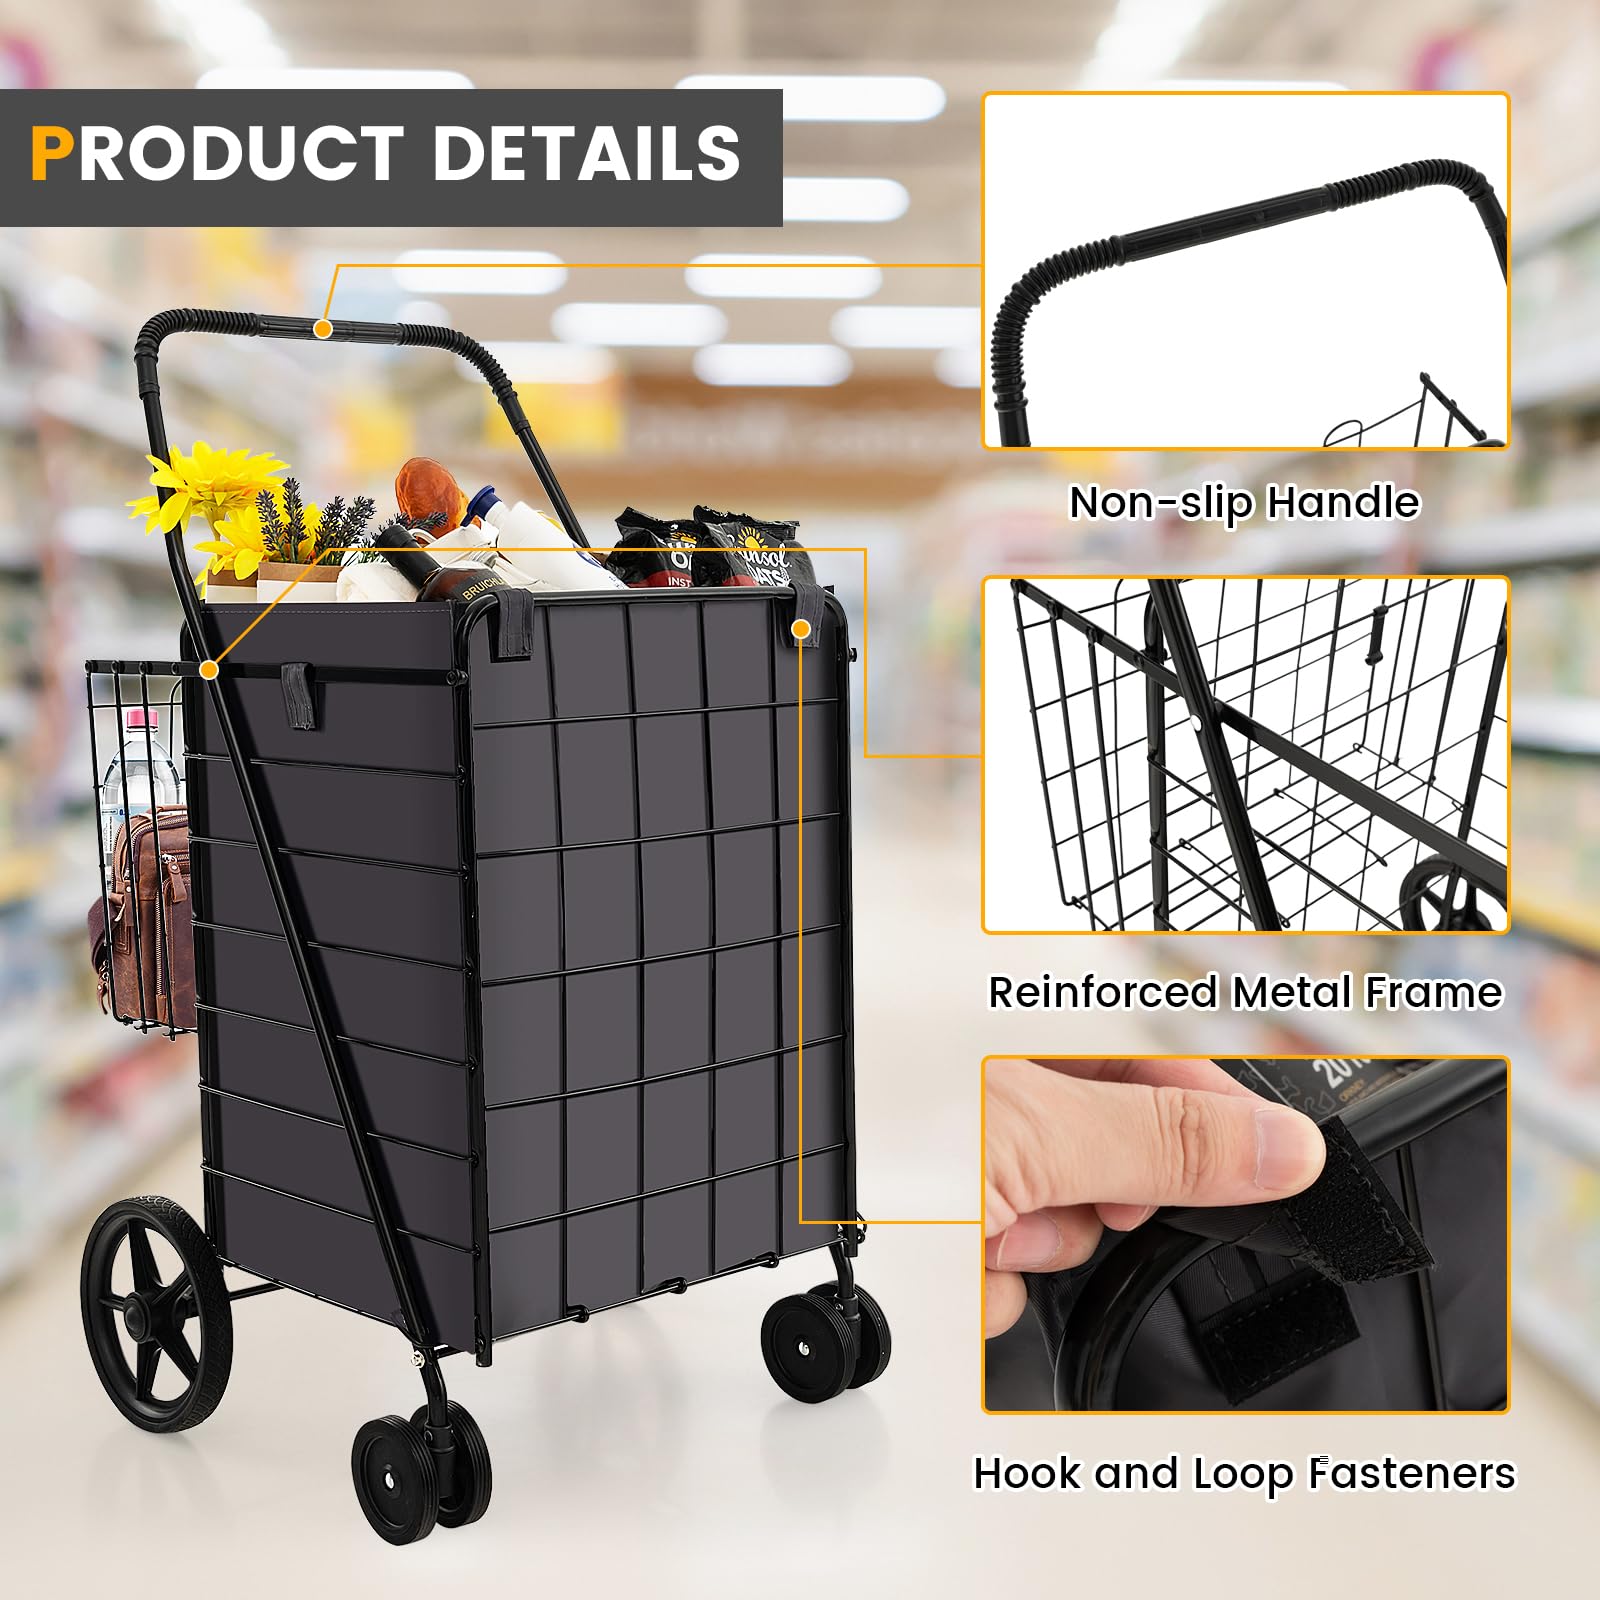 S AFSTAR Shopping Cart with Oxford Liner Bag, 27 Gal Folding Grocery Cart on Wheels, Double Basket, 330 LBS Weight Capacity, Portable Granny Cart Shopping Cart for Market Laundry (Black)